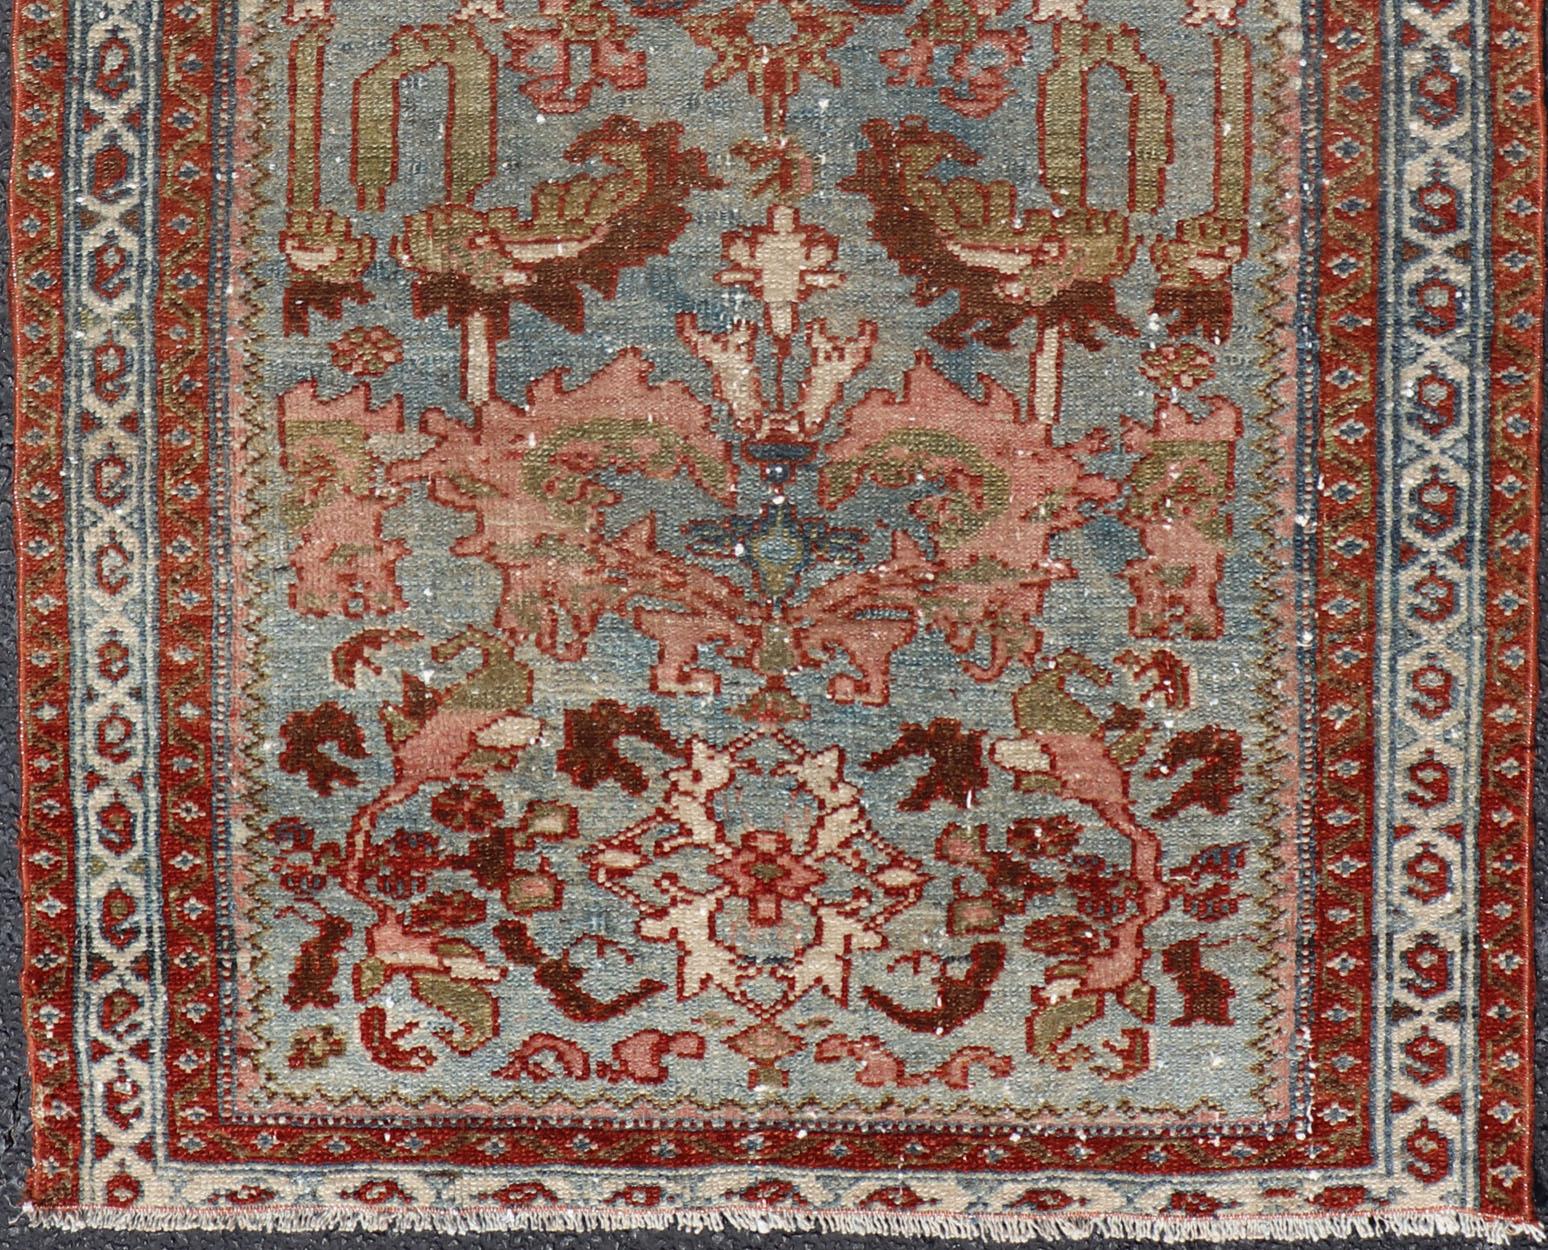 Antique Persian Malayer rug with blue field and stylized floral design, rug/R20-0814, country of origin / type: Iran / Malayer, circa 1920.

This antique Persian Malayer rug (circa 1920s) features a unique blend of colors and an intricately